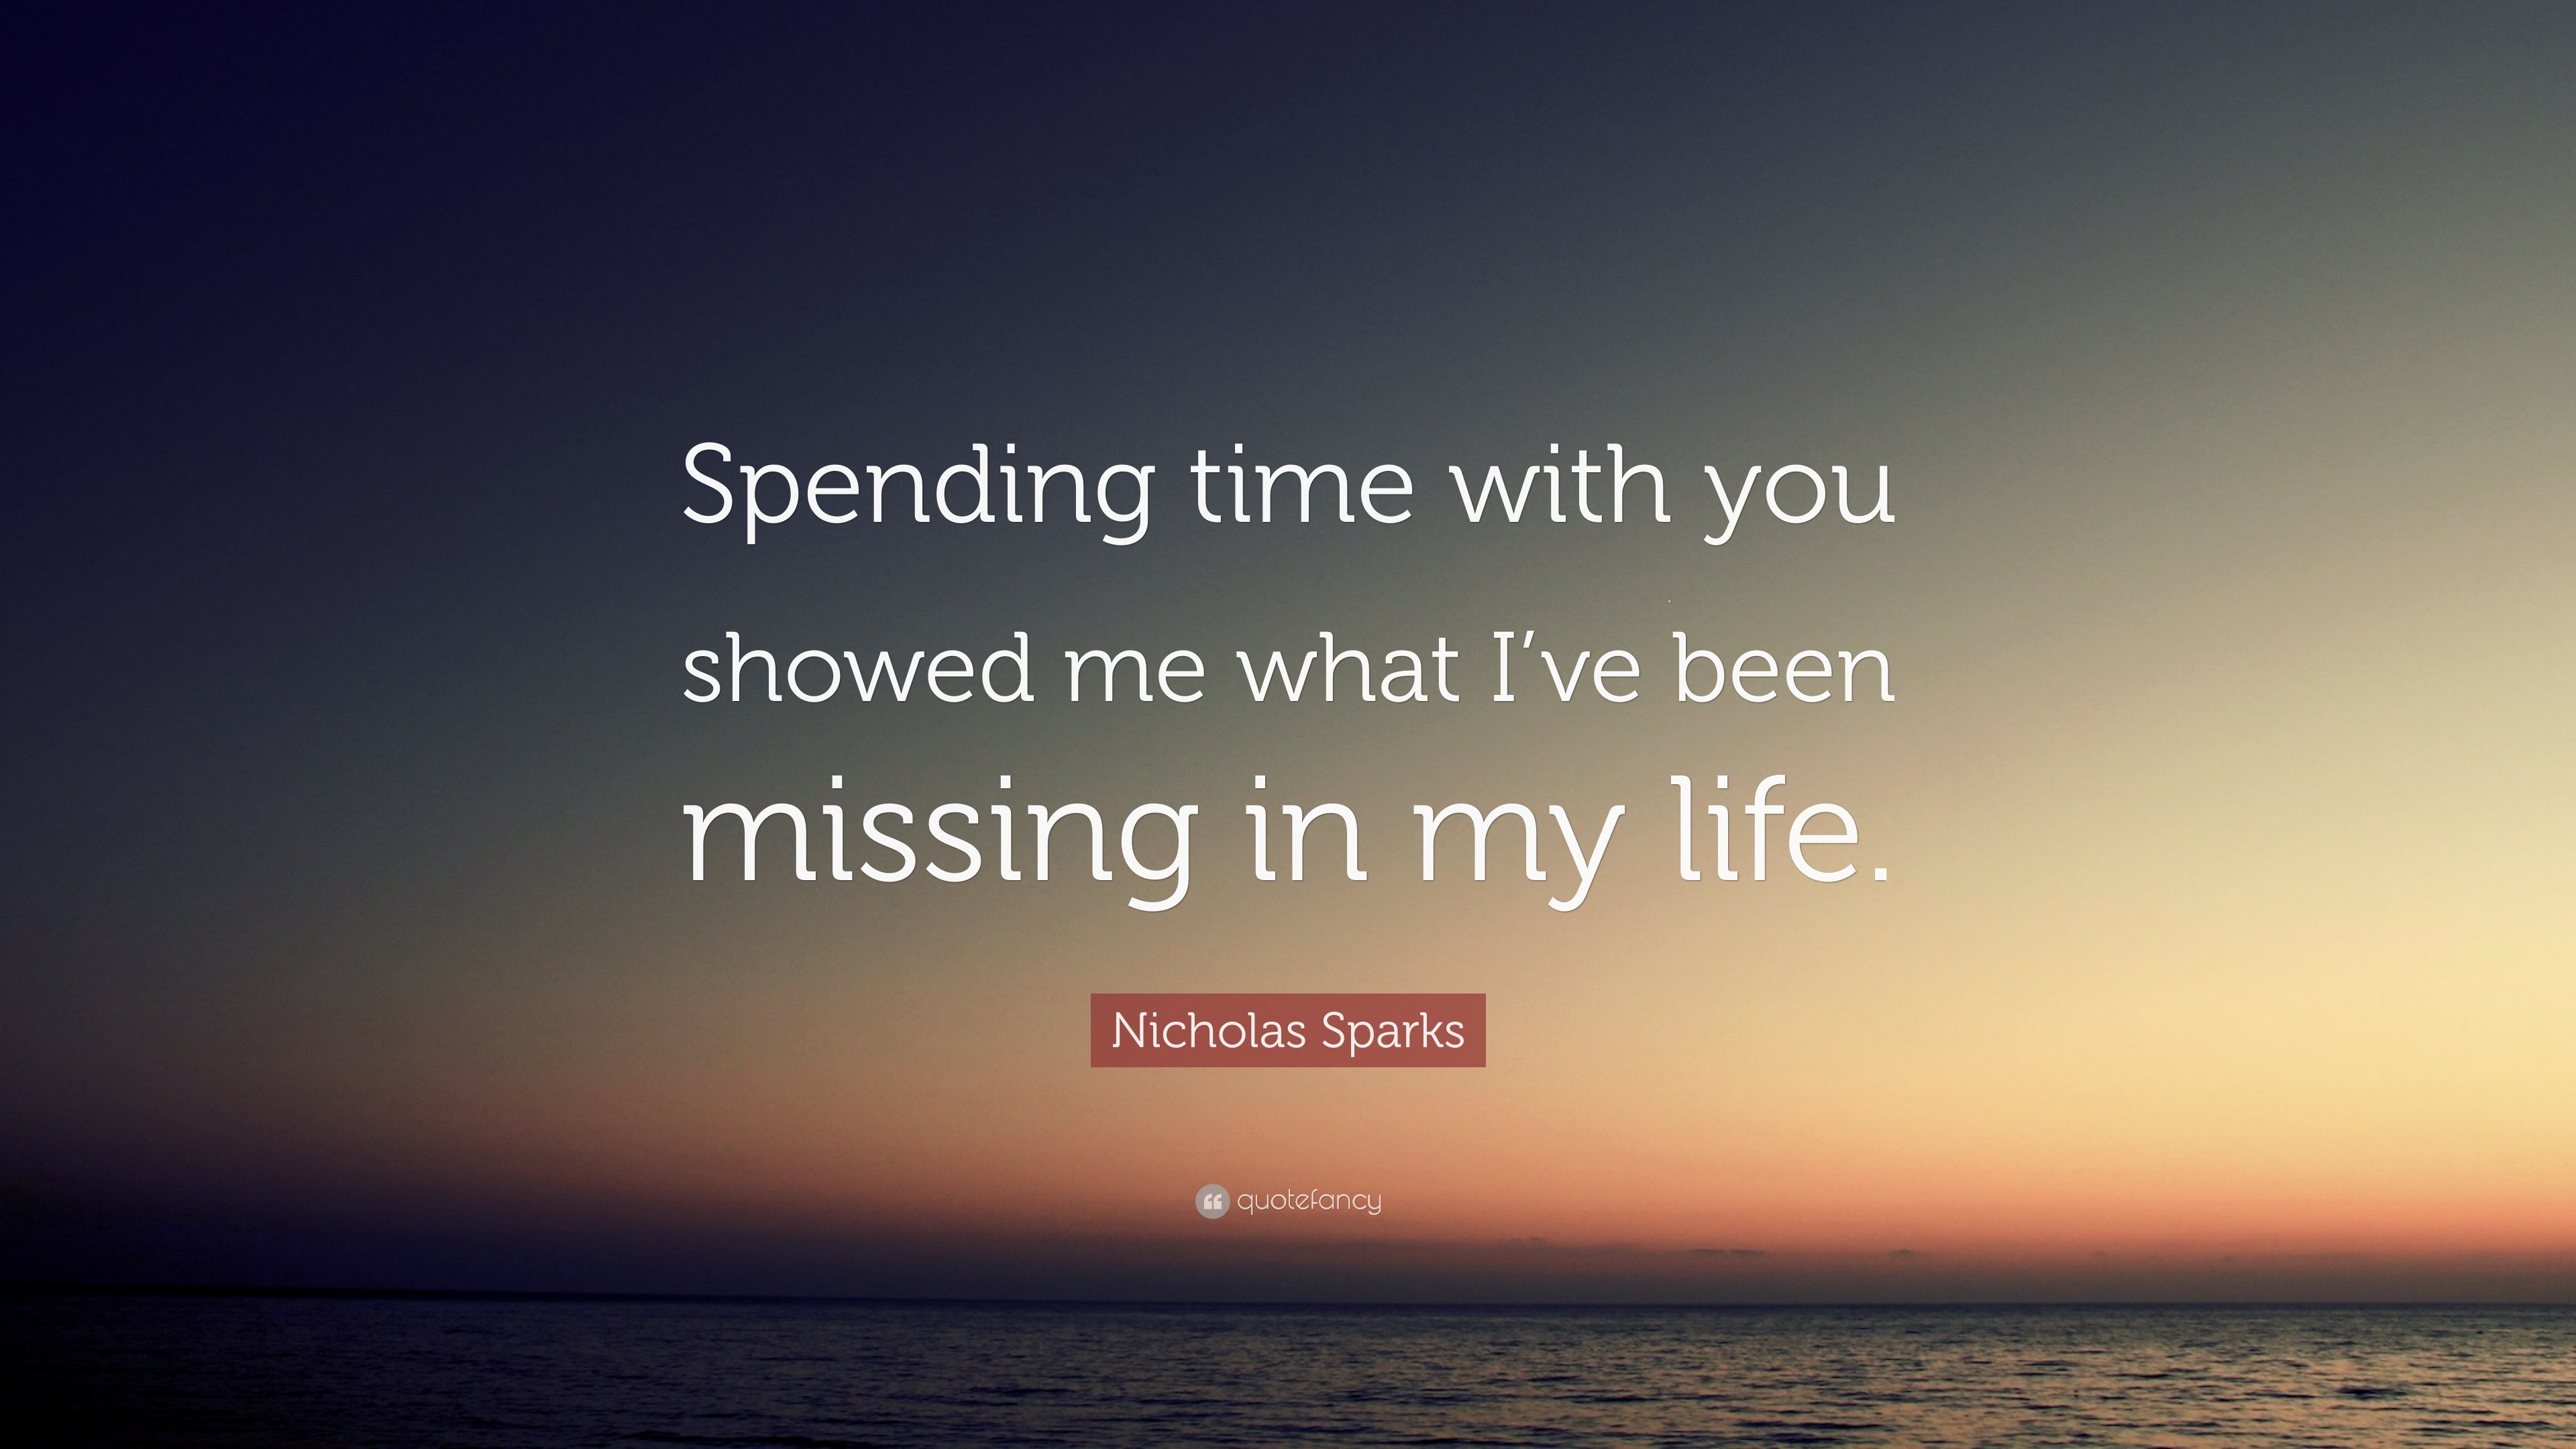 Nicholas Sparks Quote “spending Time With You Showed Me What I Ve Been Missing In My Life ”